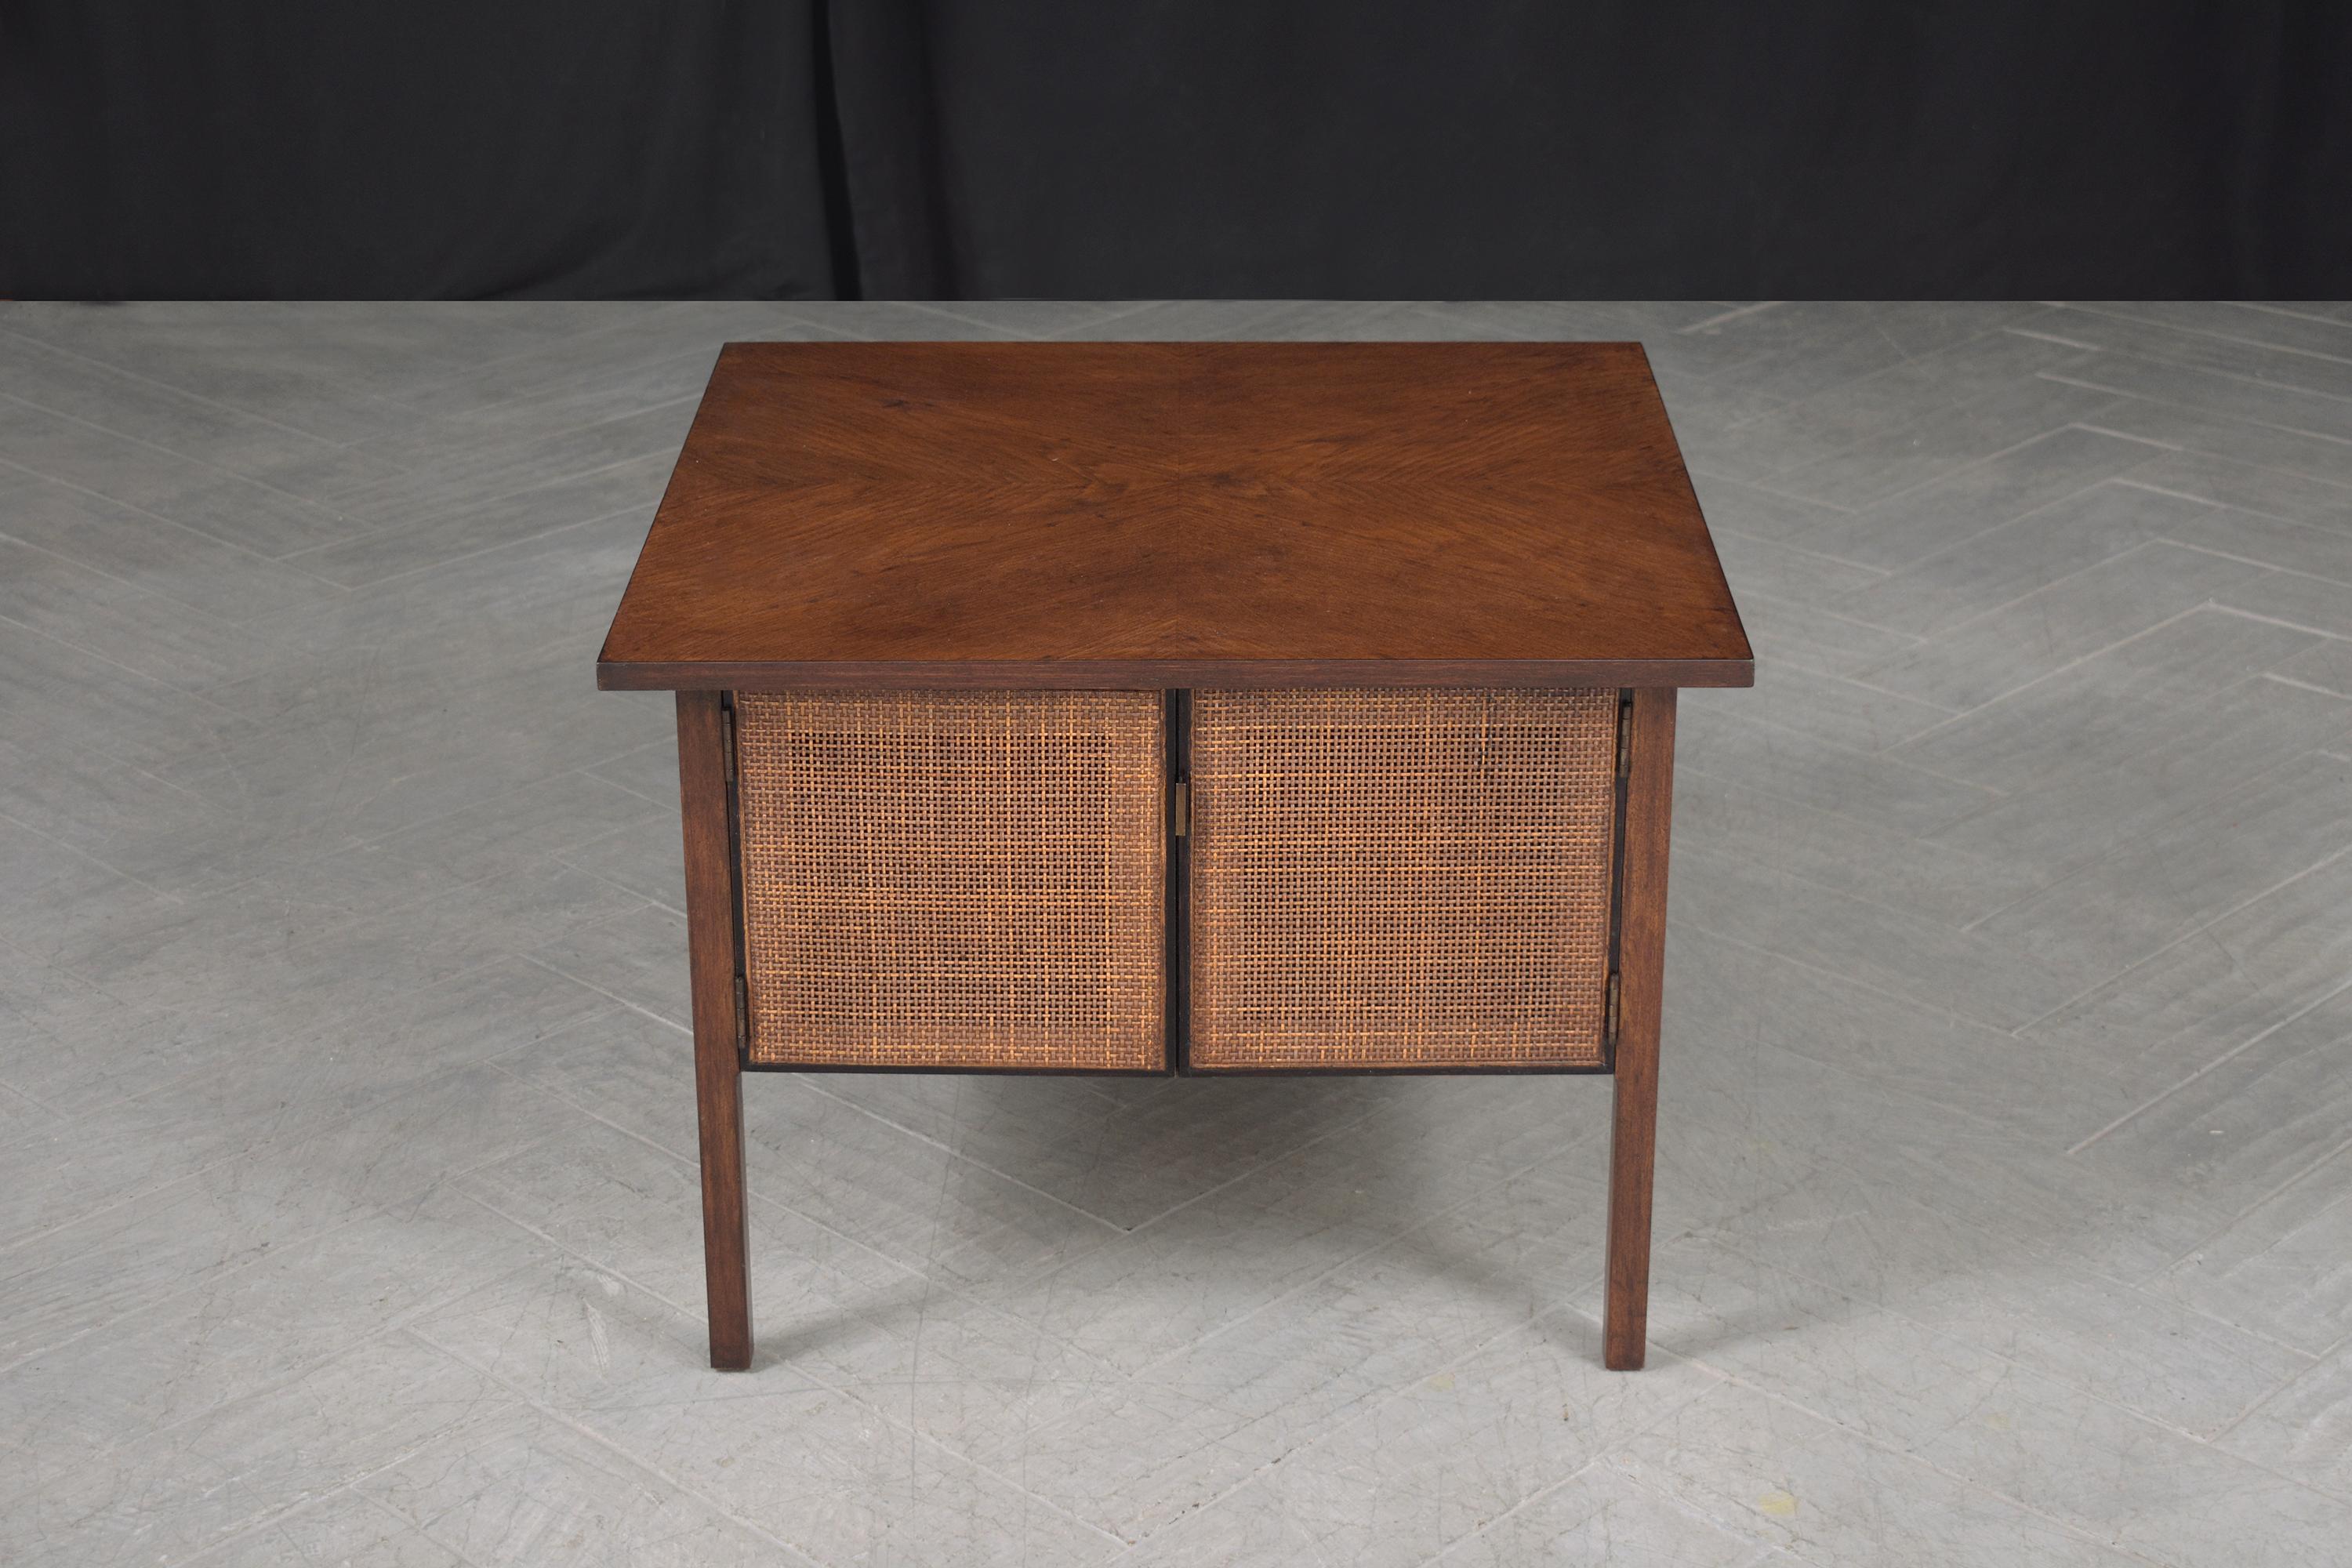 Explore this extraordinary Mid-Century Modern side table, impeccably hand-crafted from wood and meticulously restored by our expert in-house craftsmen. In great condition, this 1970s vintage piece boasts captivating features, including a dark walnut